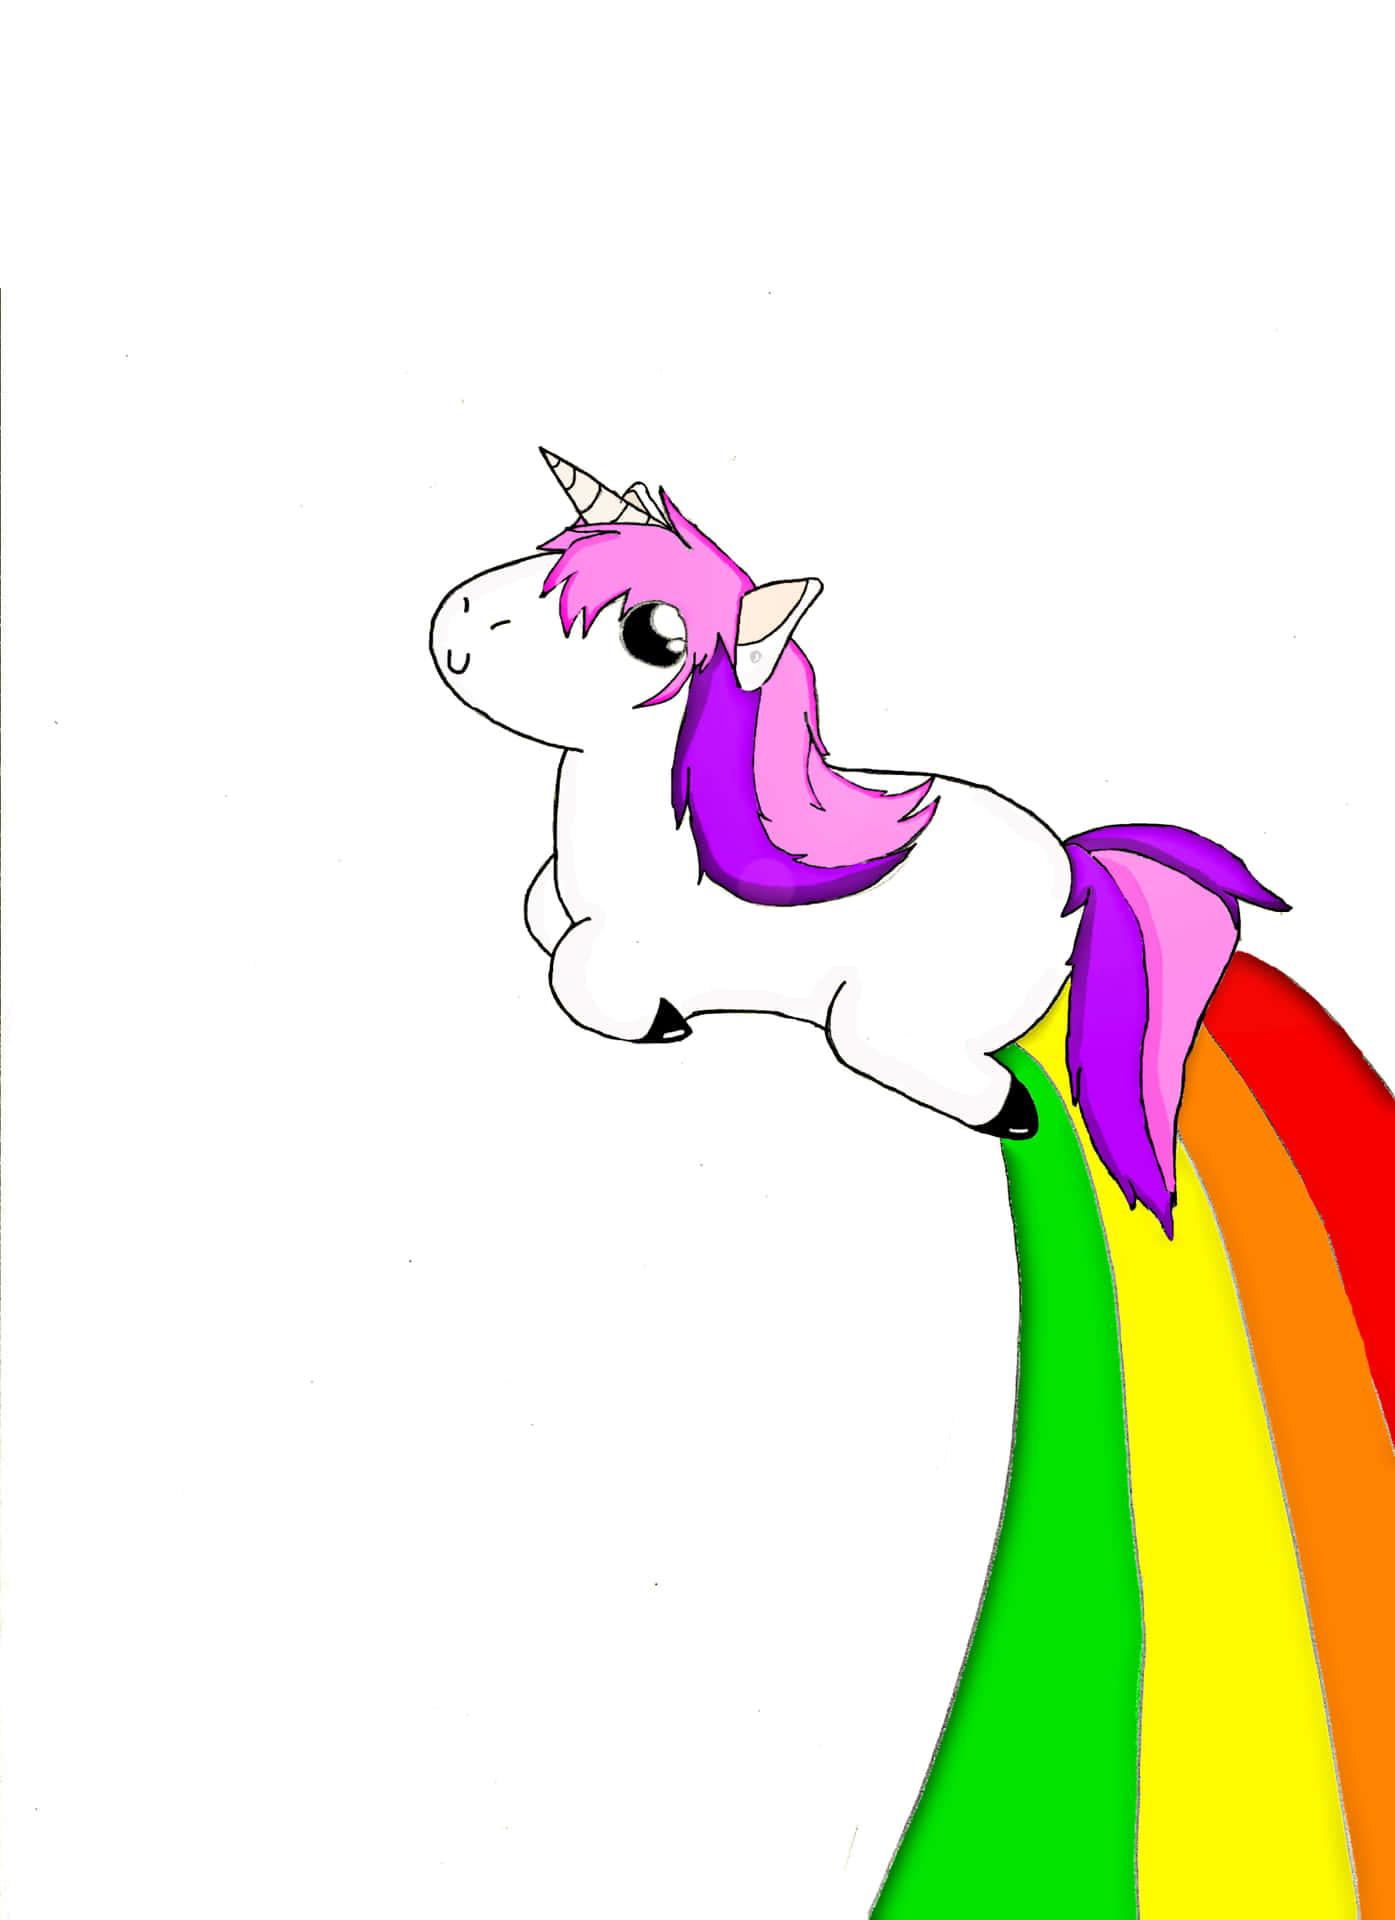 Don't be fooled by her looks, this cartoon unicorn is a force to be reckoned with!